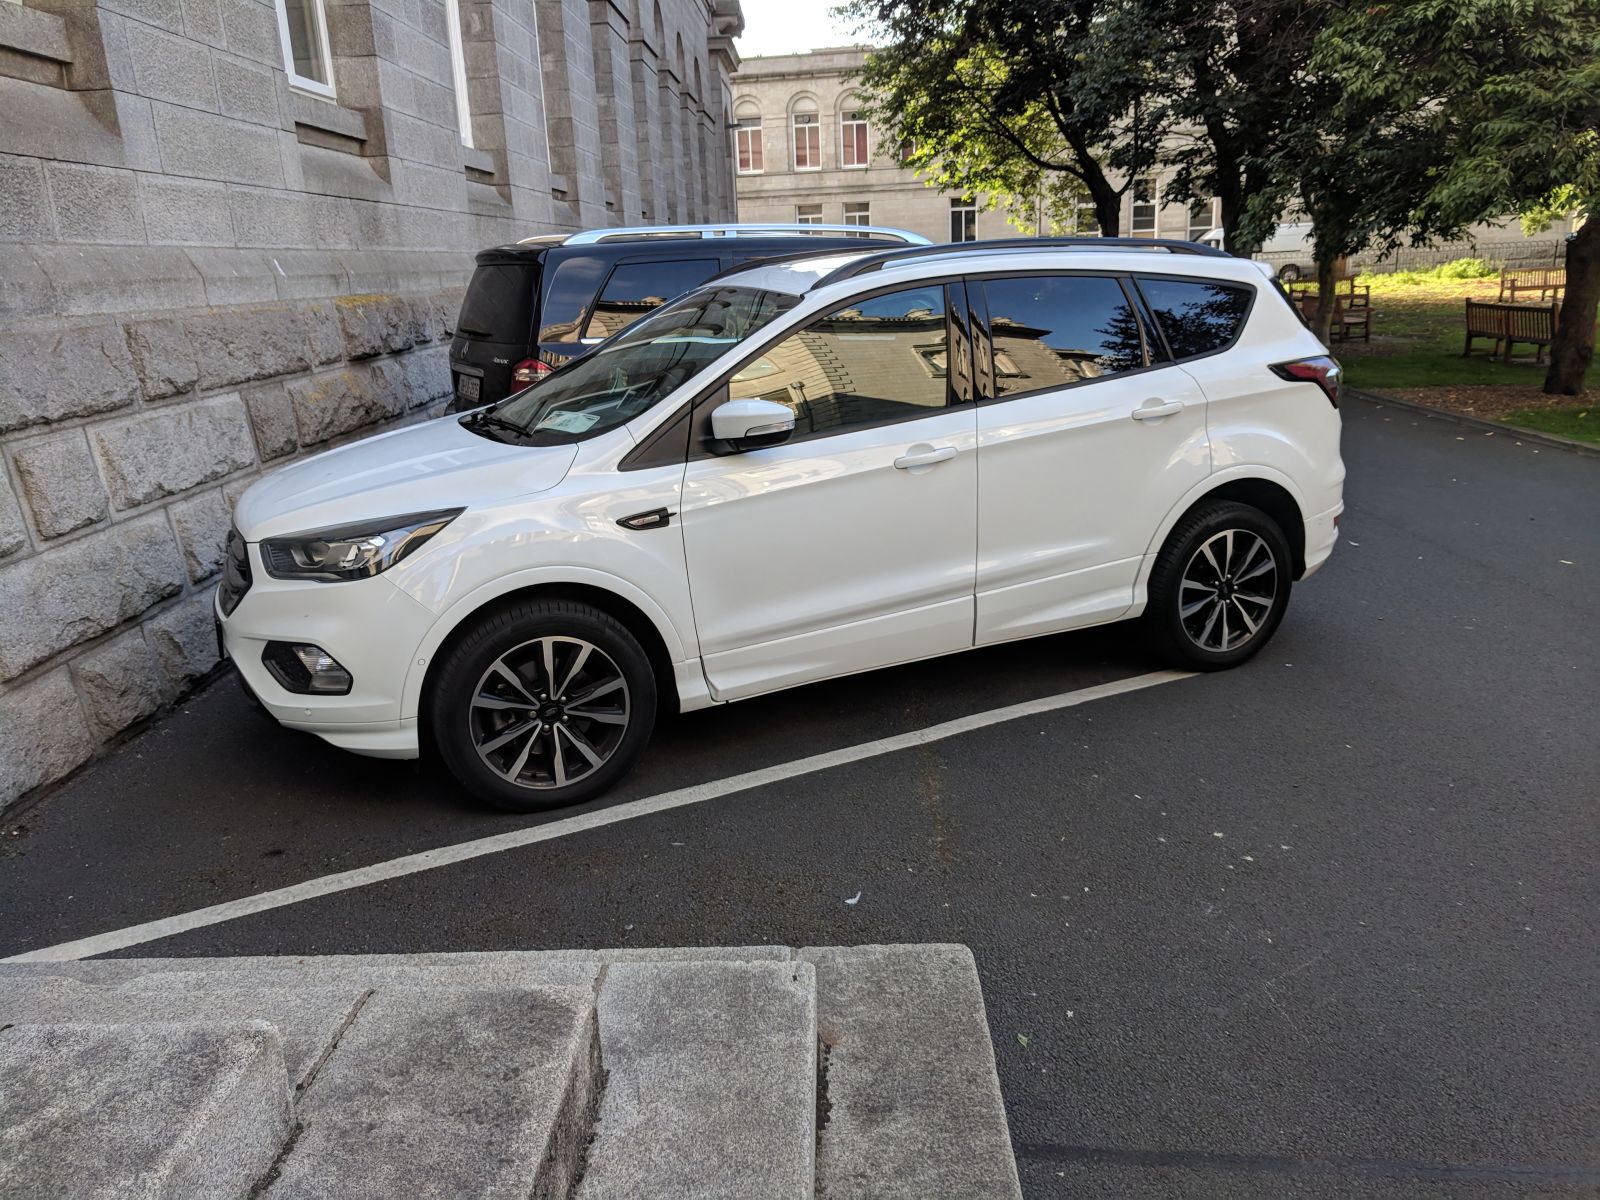 Ford Kuga ST. A slightly less boring Escape